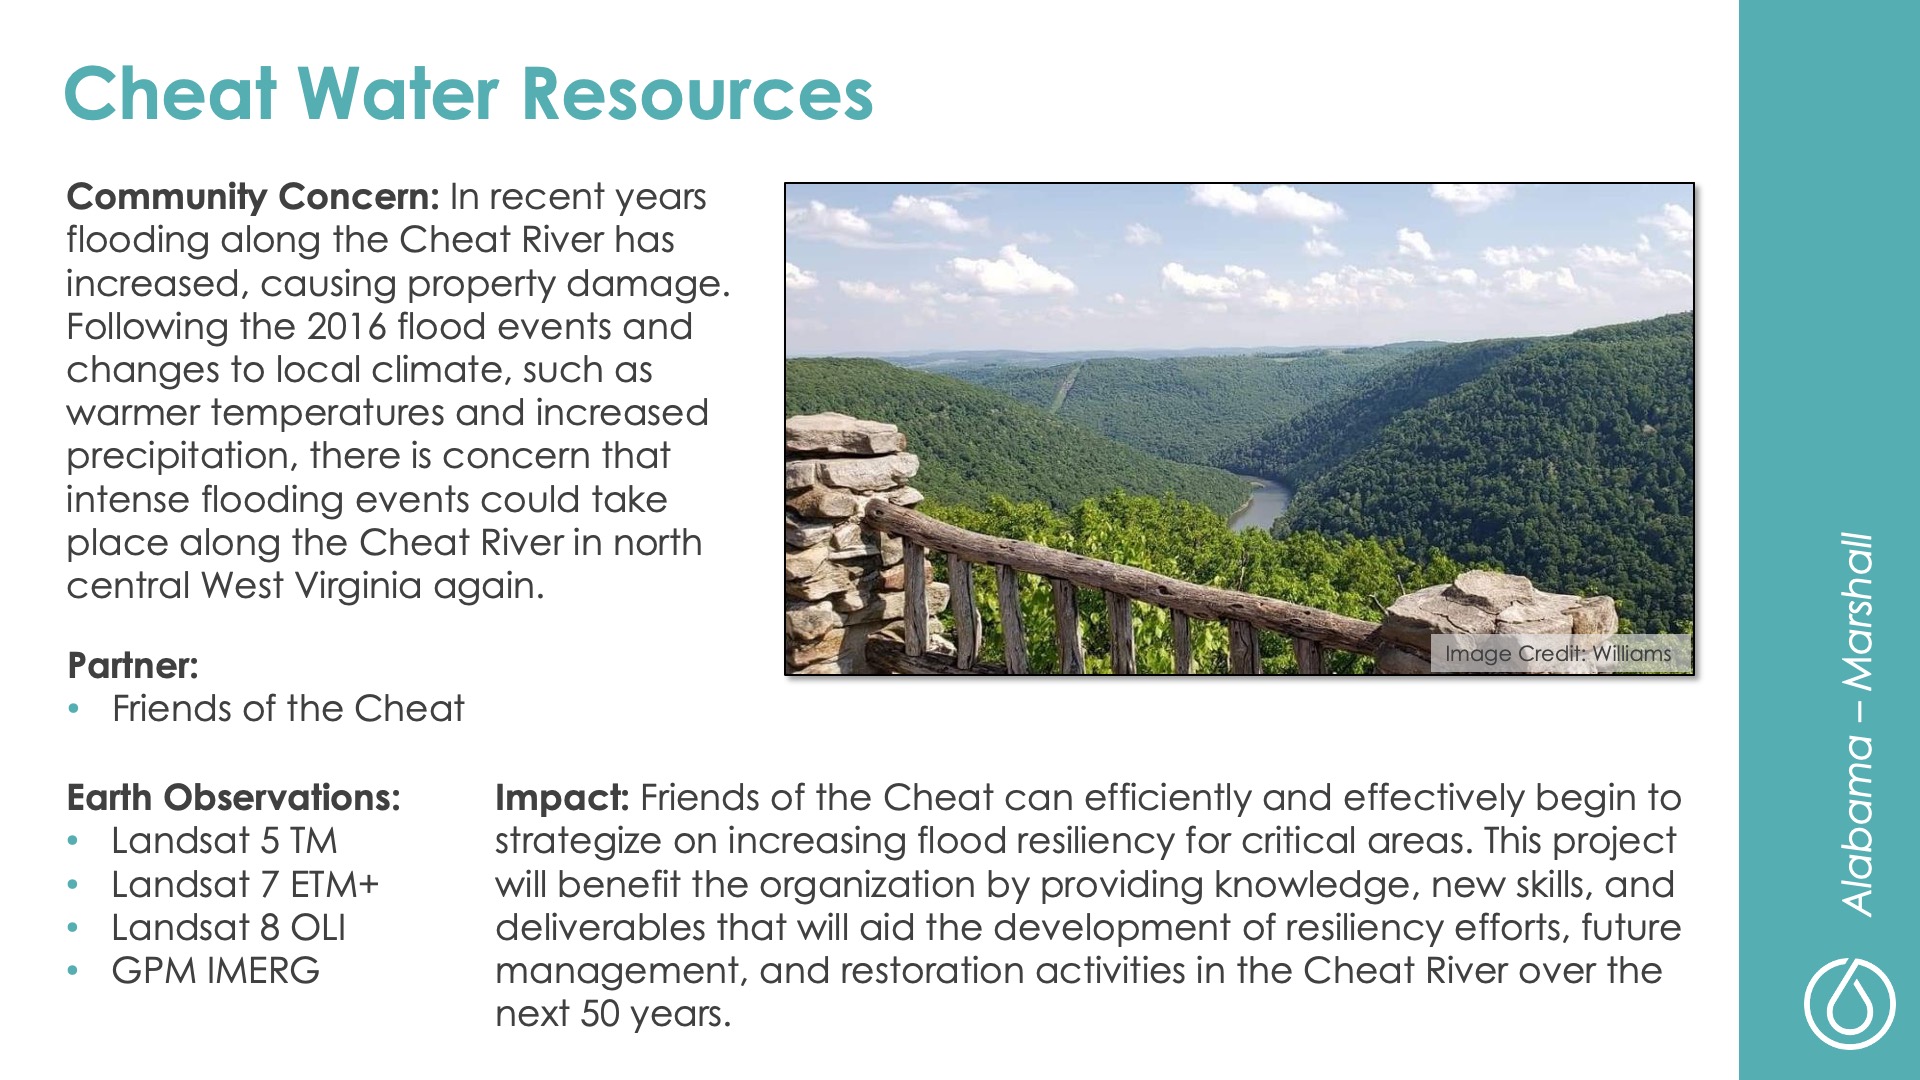 Slide title: Cheat Water ResourcesDEVELOP Node: Alabama - MarshallCommunity Concern: In recent years flooding along the Cheat River has increased, causing property damage. Following the 2016 flood events and changes to local climate, such as warmer temperatures and increased precipitation, there is concern that intense flooding events could take place along the Cheat River in north central West Virginia again.Impact: Friends of the Cheat can efficiently and effectively begin to strategize on increasing flood resiliency for critical areas. This project will benefit the organization by providing knowledge, new skills, and deliverables that will aid the development of resiliency efforts, future management, and restoration activities in the Cheat River over the next 50 years.Partner: Friends of the CheatEarth Observations: Landsat 5 TM, Landsat 7 ETM+, Landsat 8 OLI, GPM IMERG